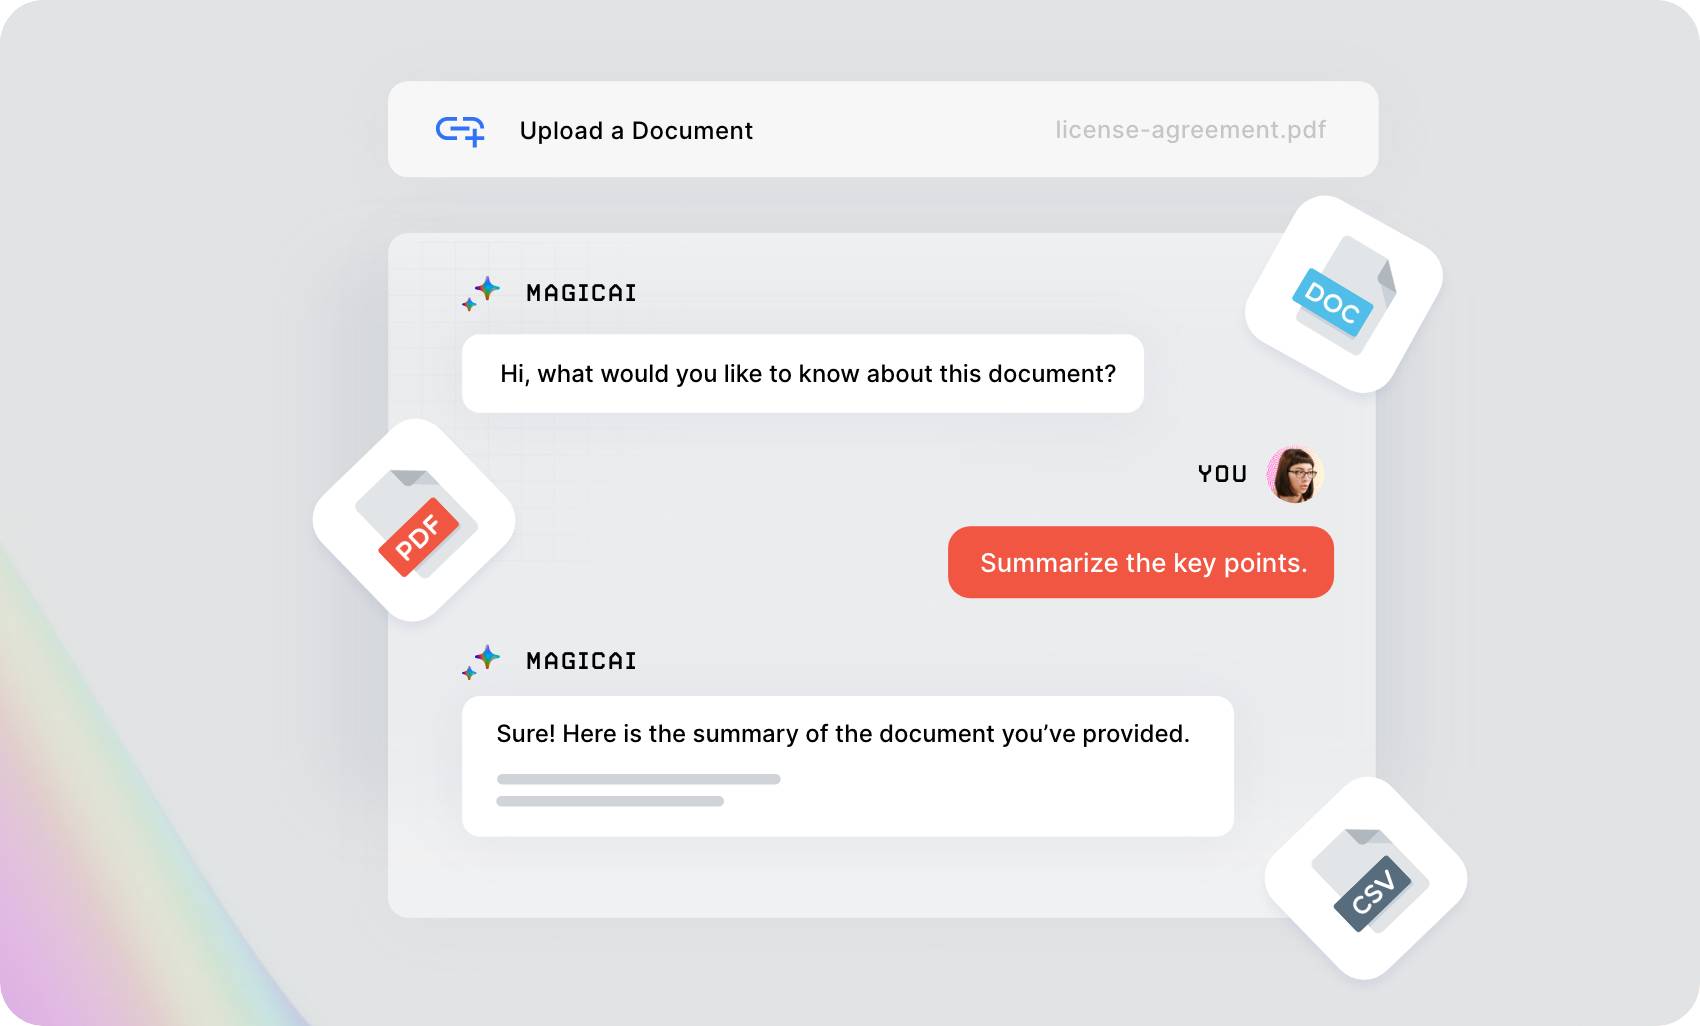 Chat direct to your documents and get the answers you need!